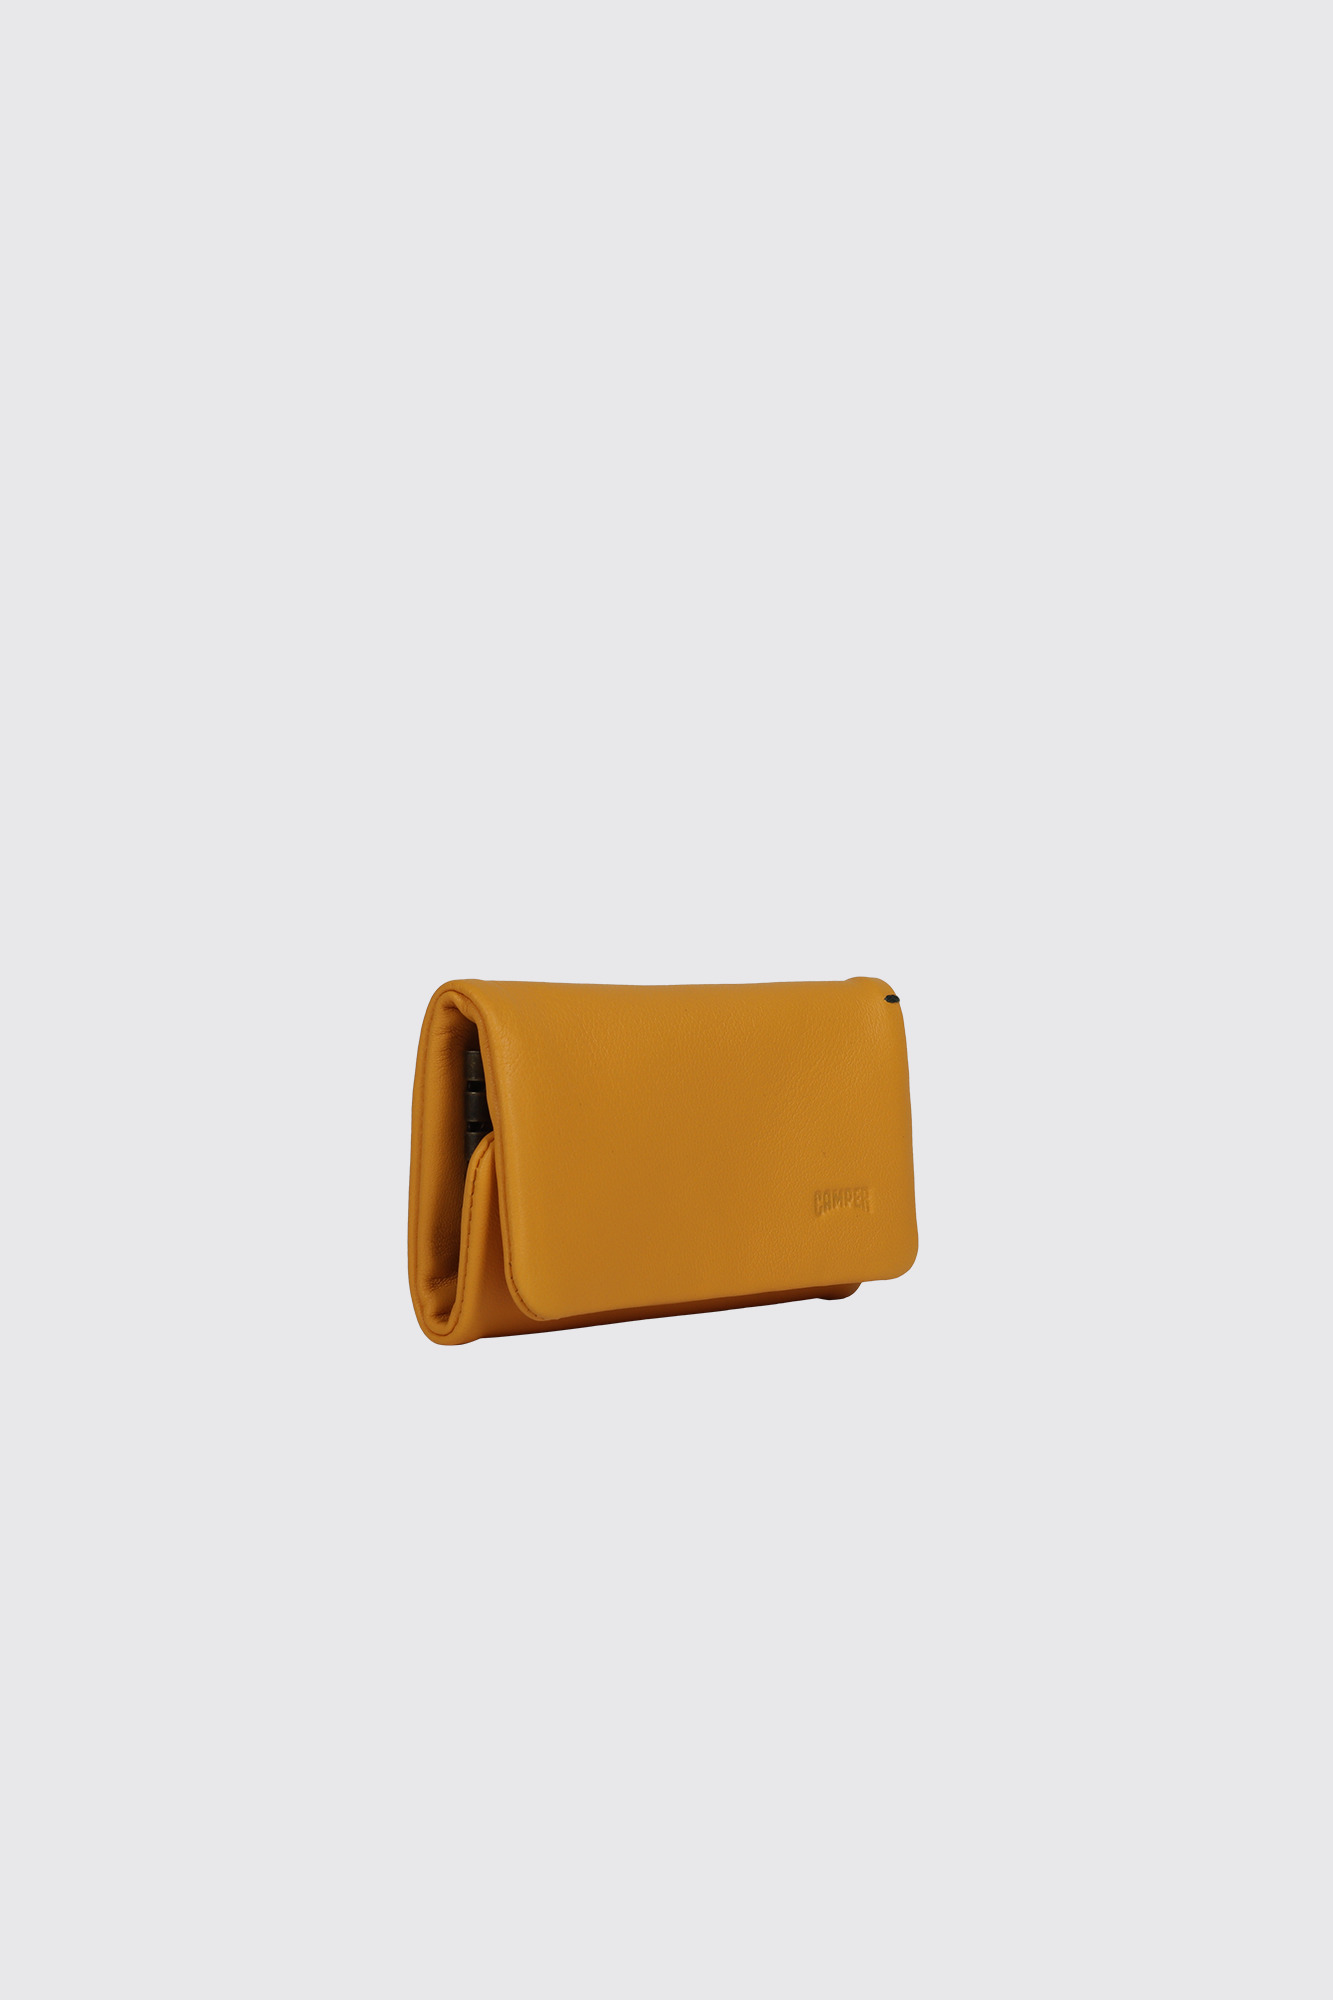 Bags & Accessories for Unisex - Spring/Summer collection - Camper